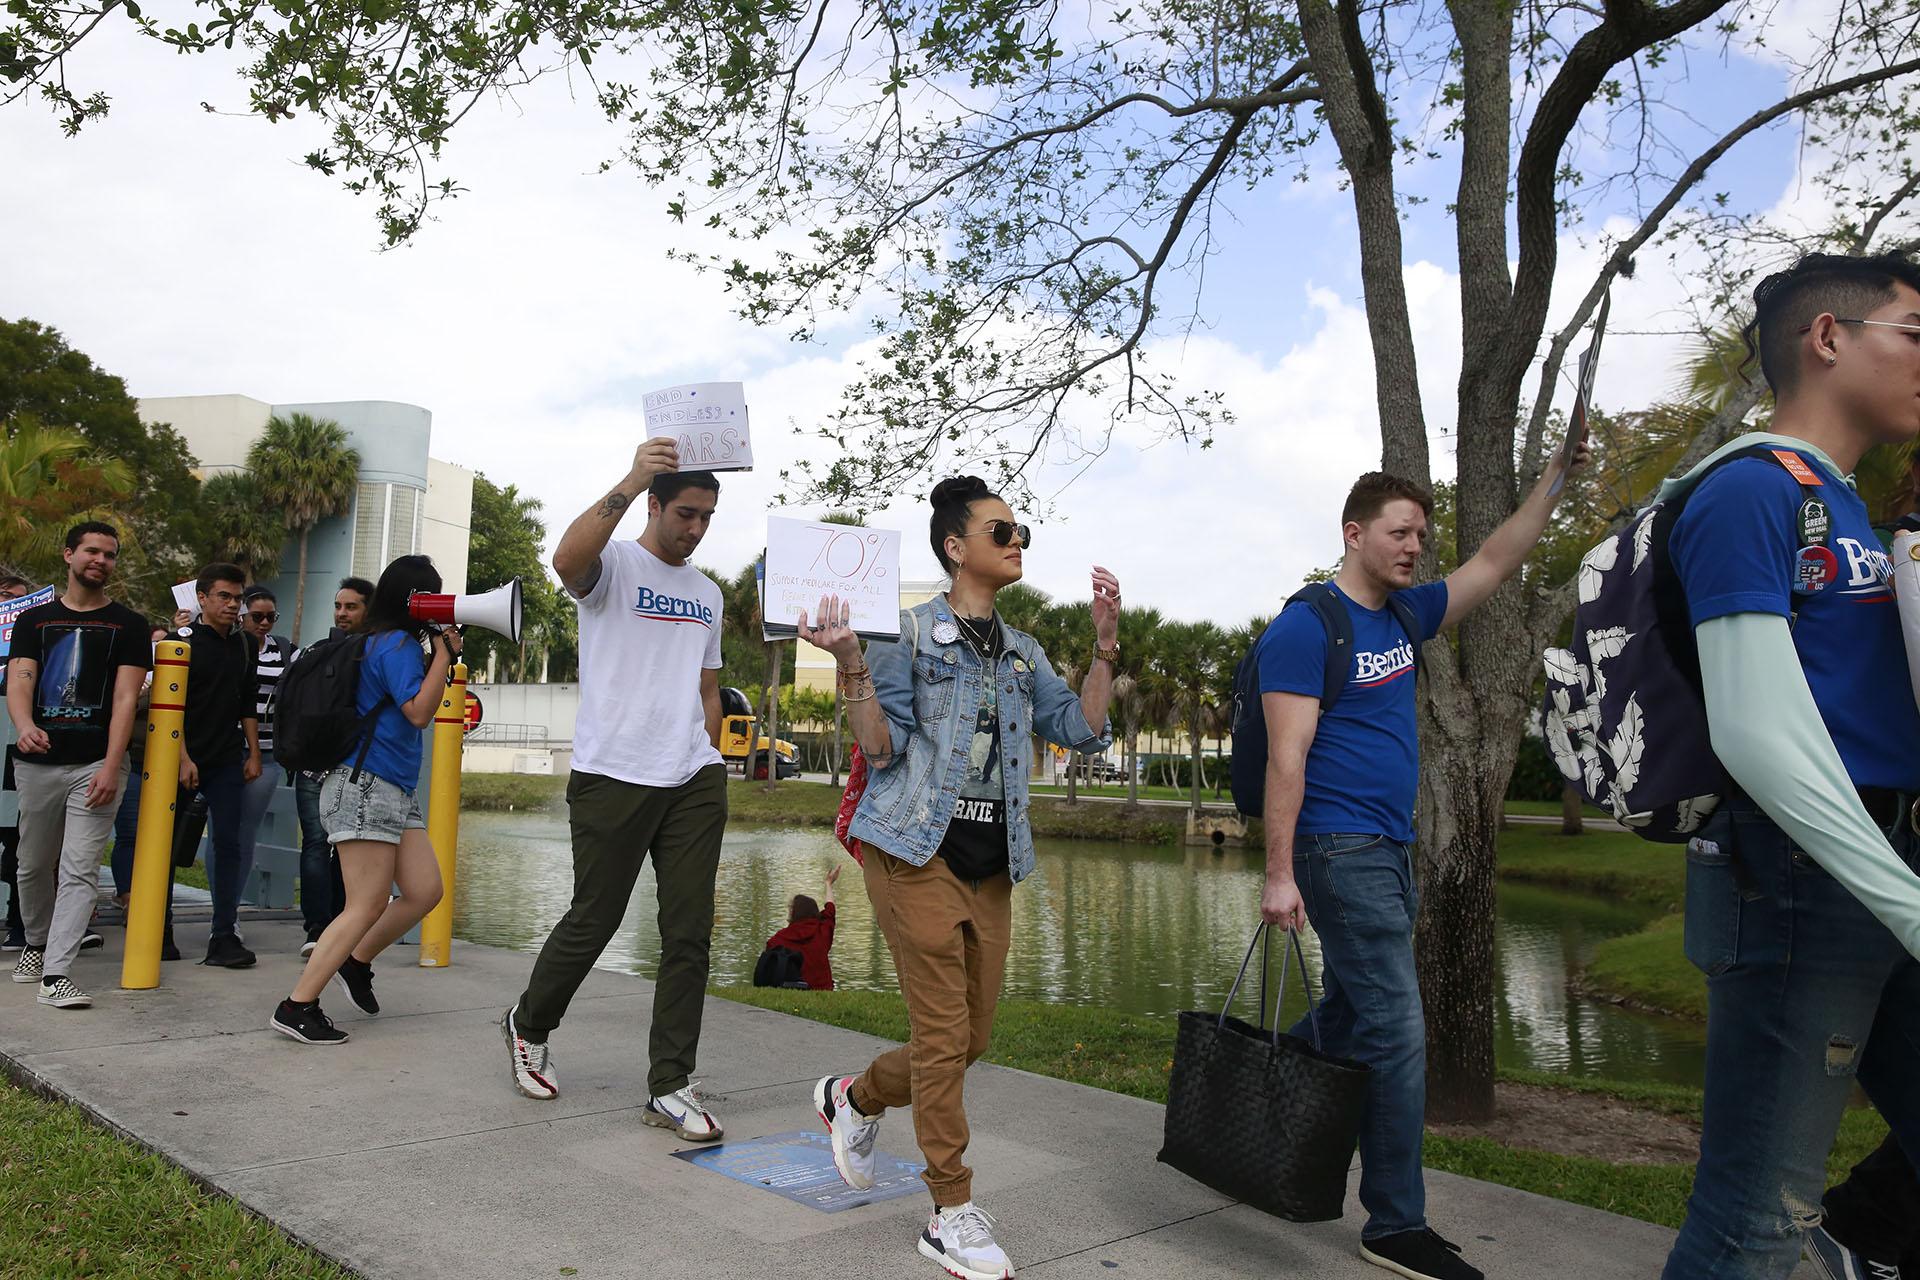 Students chant during the Bernie 2020 March to Early Vote at Florida International University to on Wednesday, March 11, 2020, in Miami. Florida and its 219 delegates could be the knockout punch for presidential hopeful Bernie Sanders after a dismal showing in the Michigan primary. (AP Photo / Brynn Anderson)